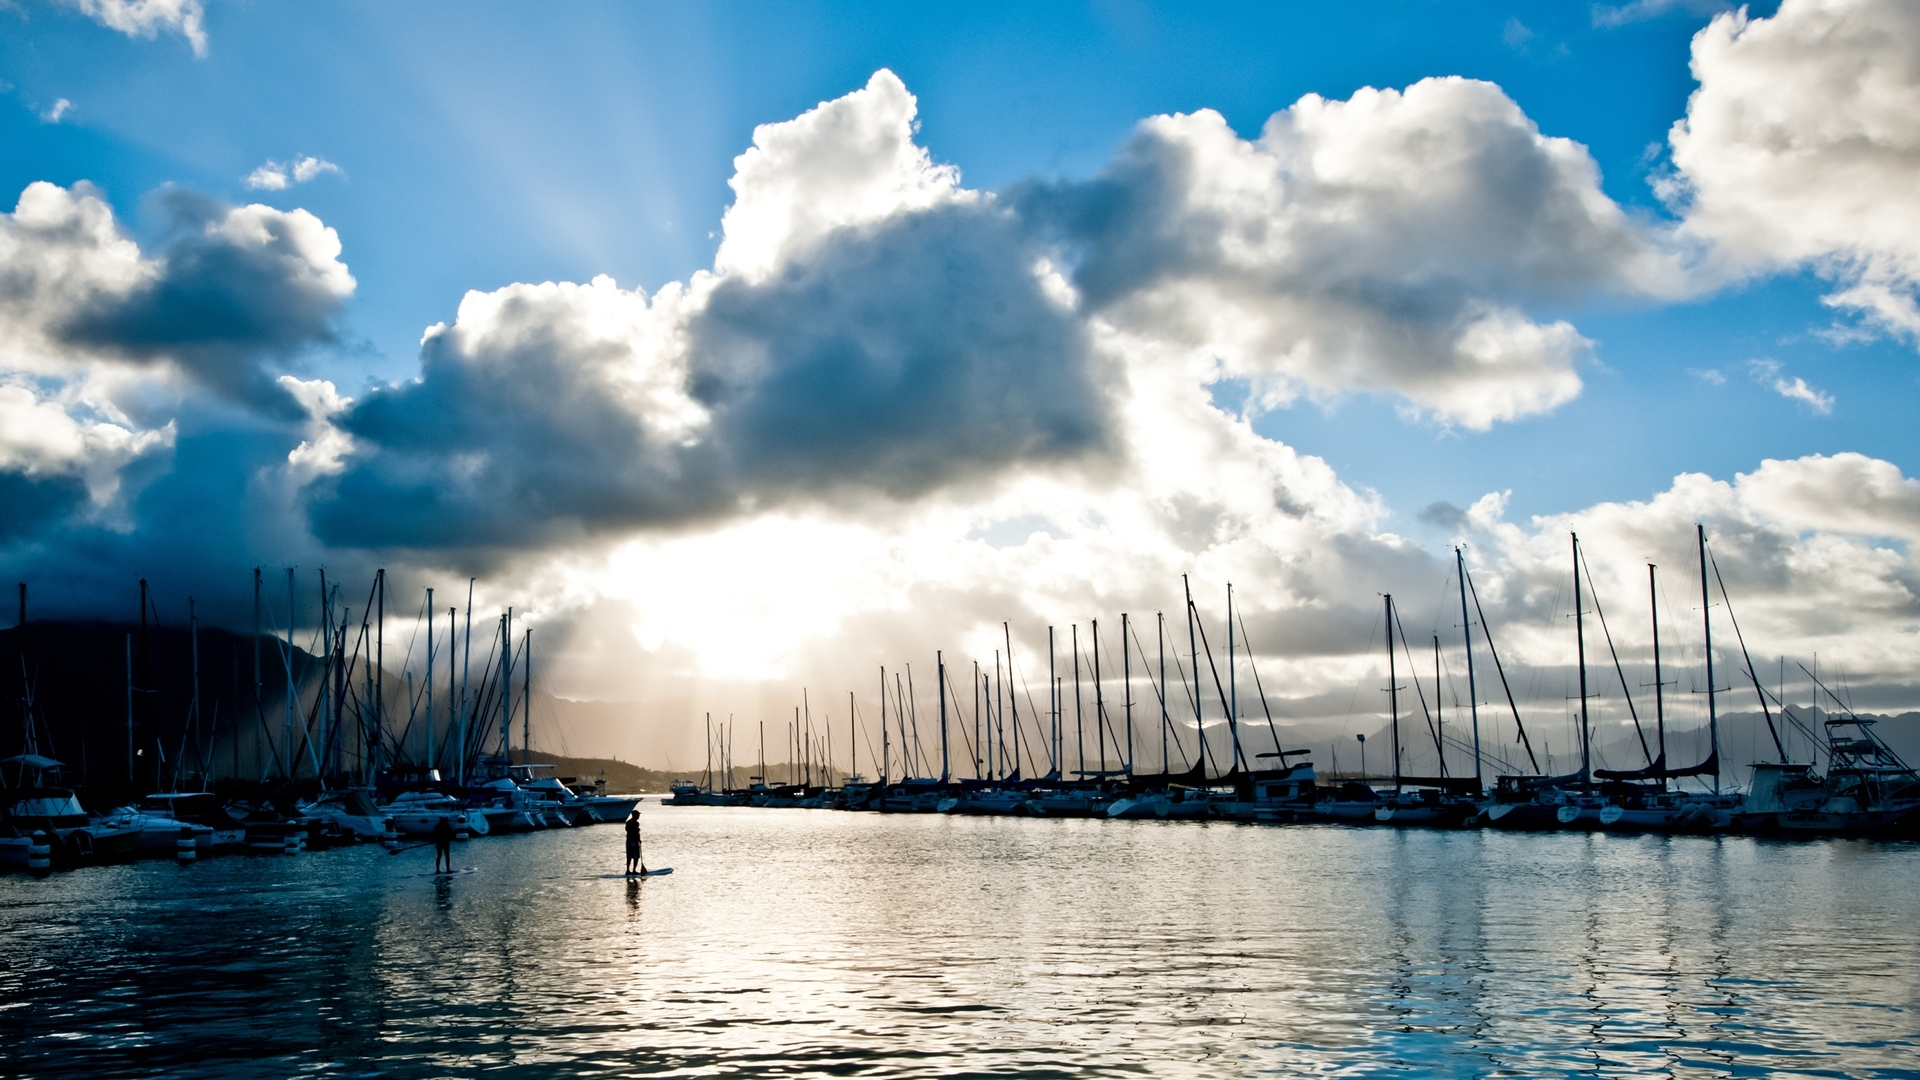 landscape, rivers, clouds, yachts wallpaper for mobile